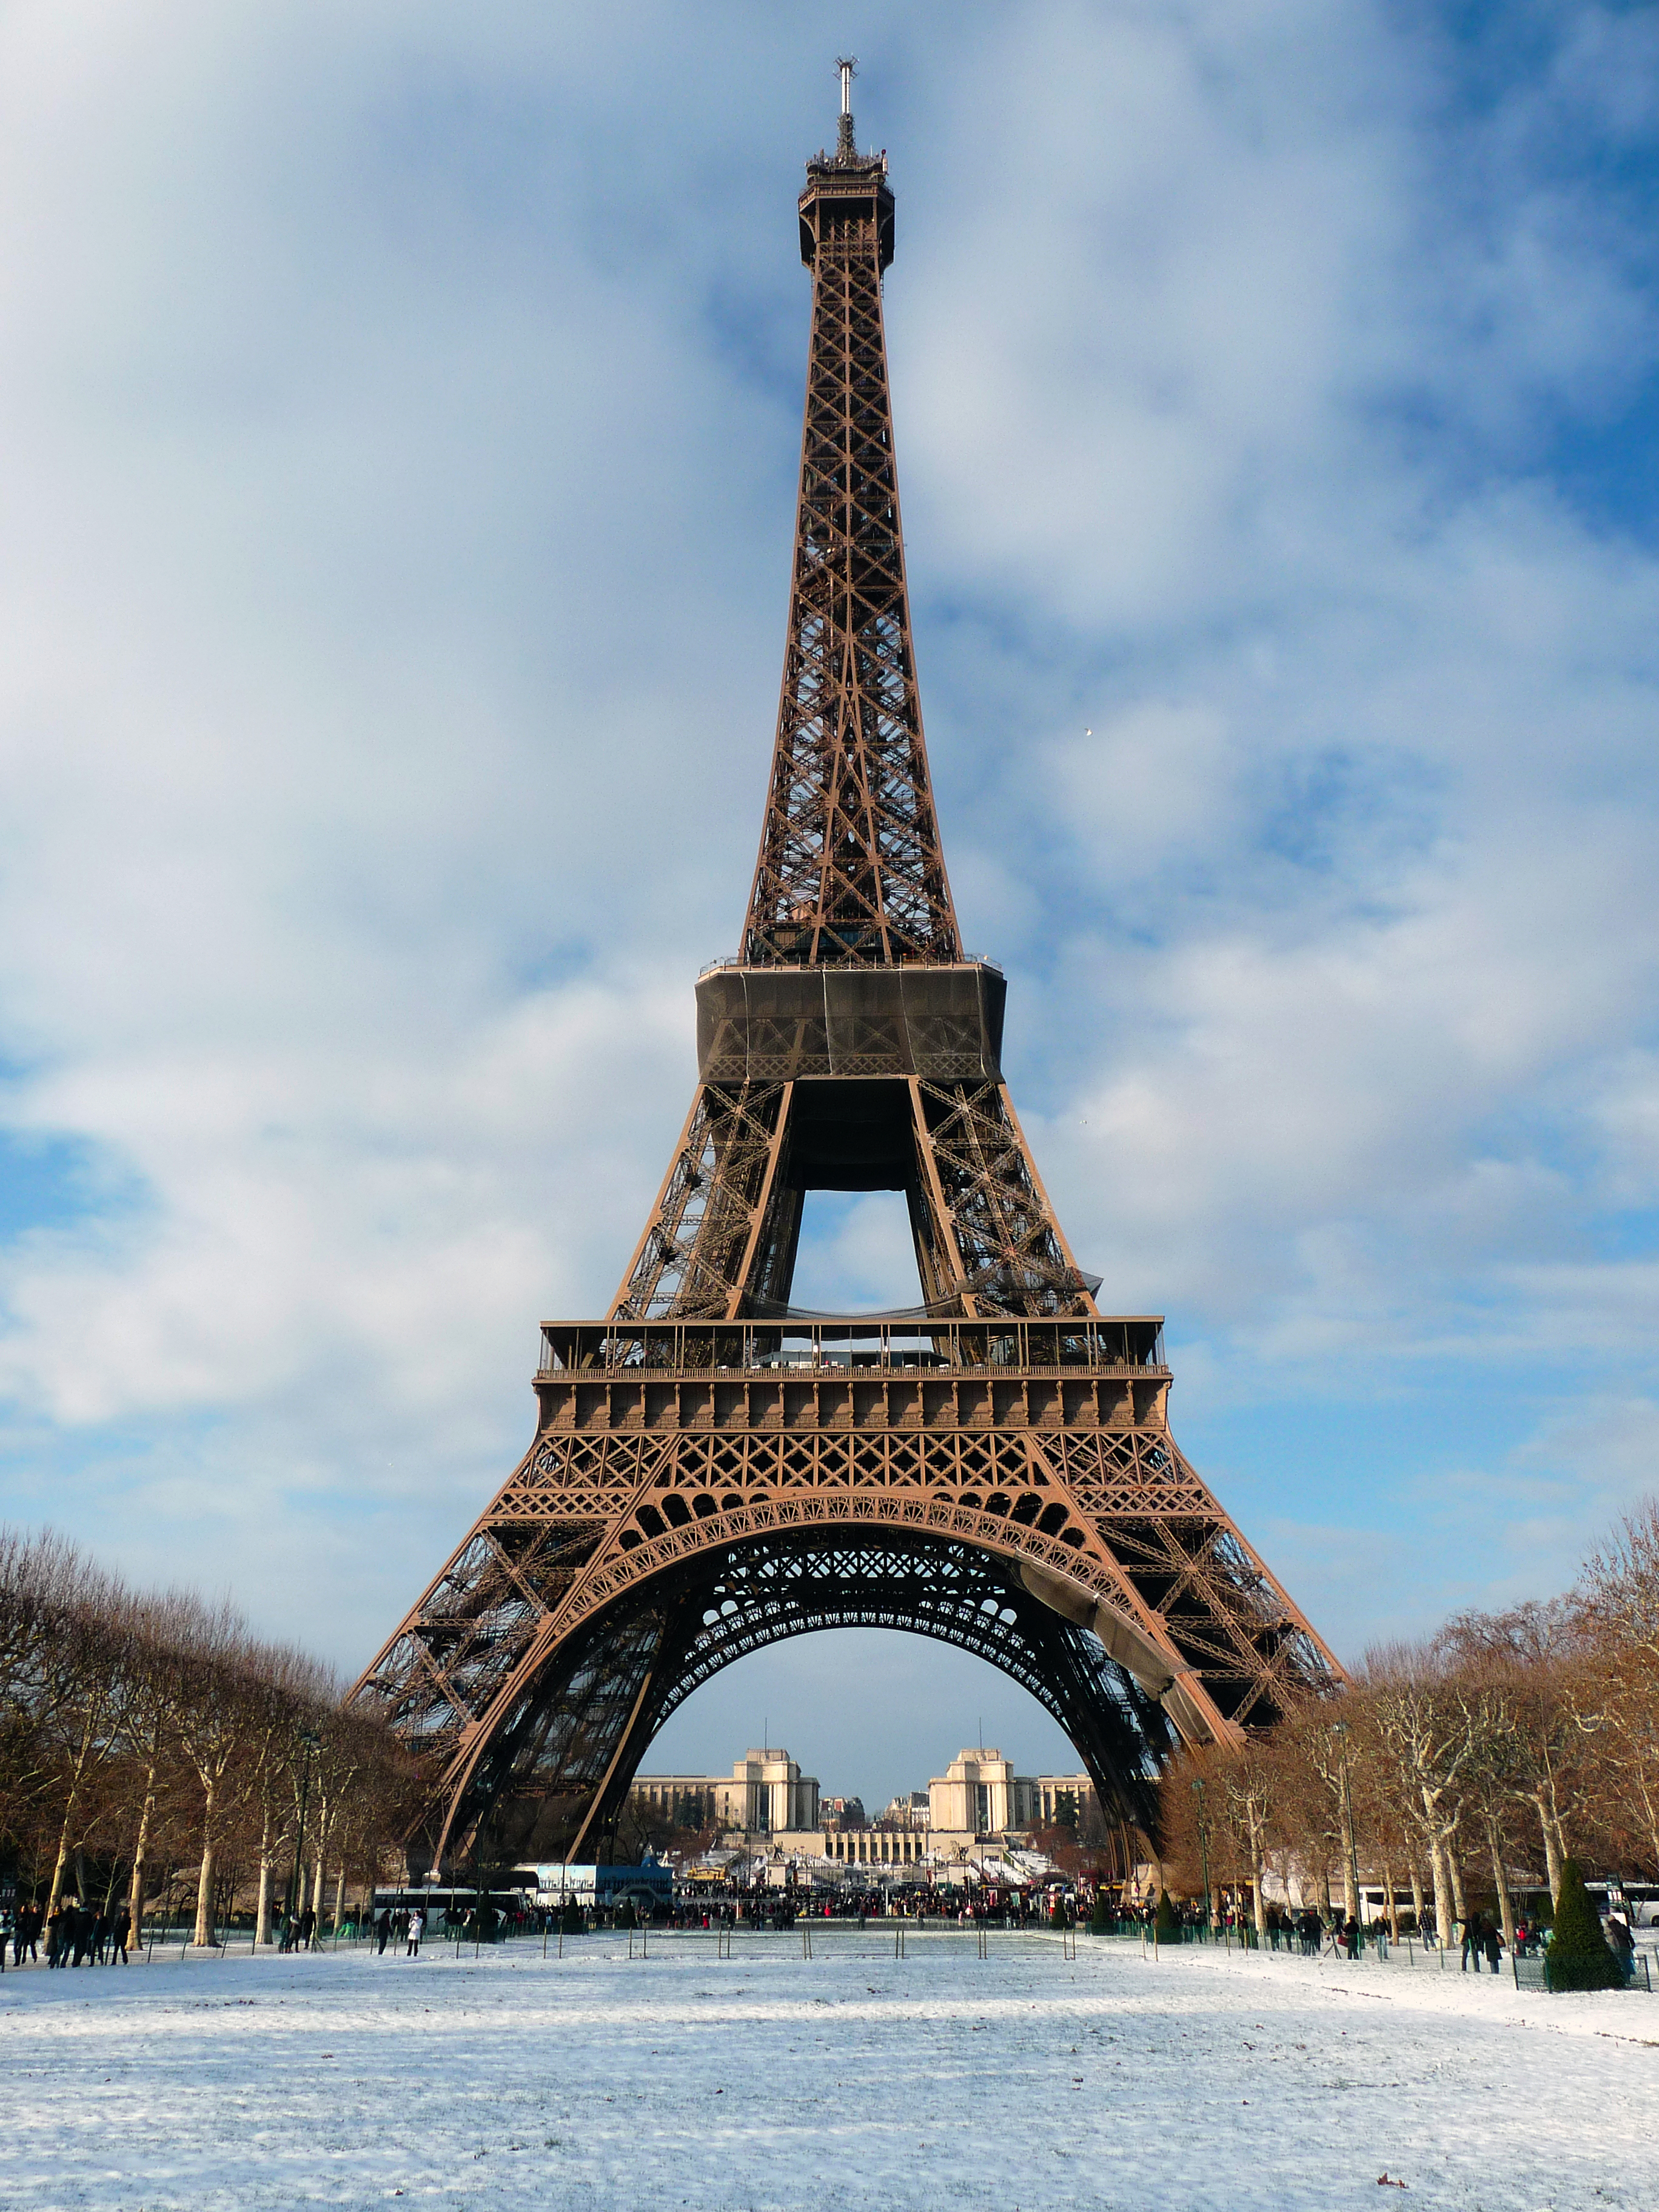 File:Eiffel Tower at Paris, Las Vegas by day, March 15, 2009.jpg -  Wikimedia Commons